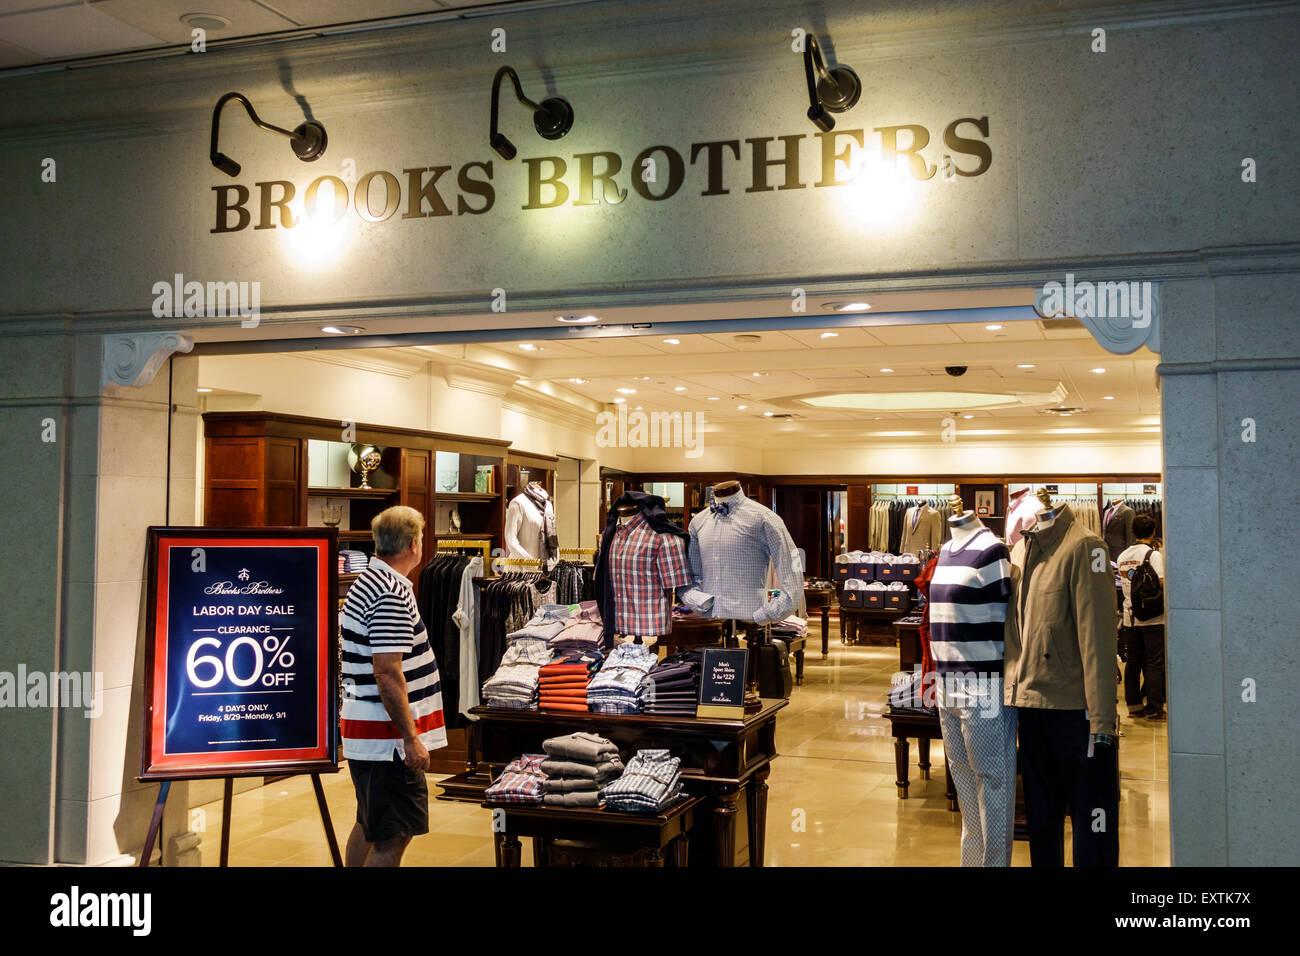 Brooks Brothers High Resolution Stock 